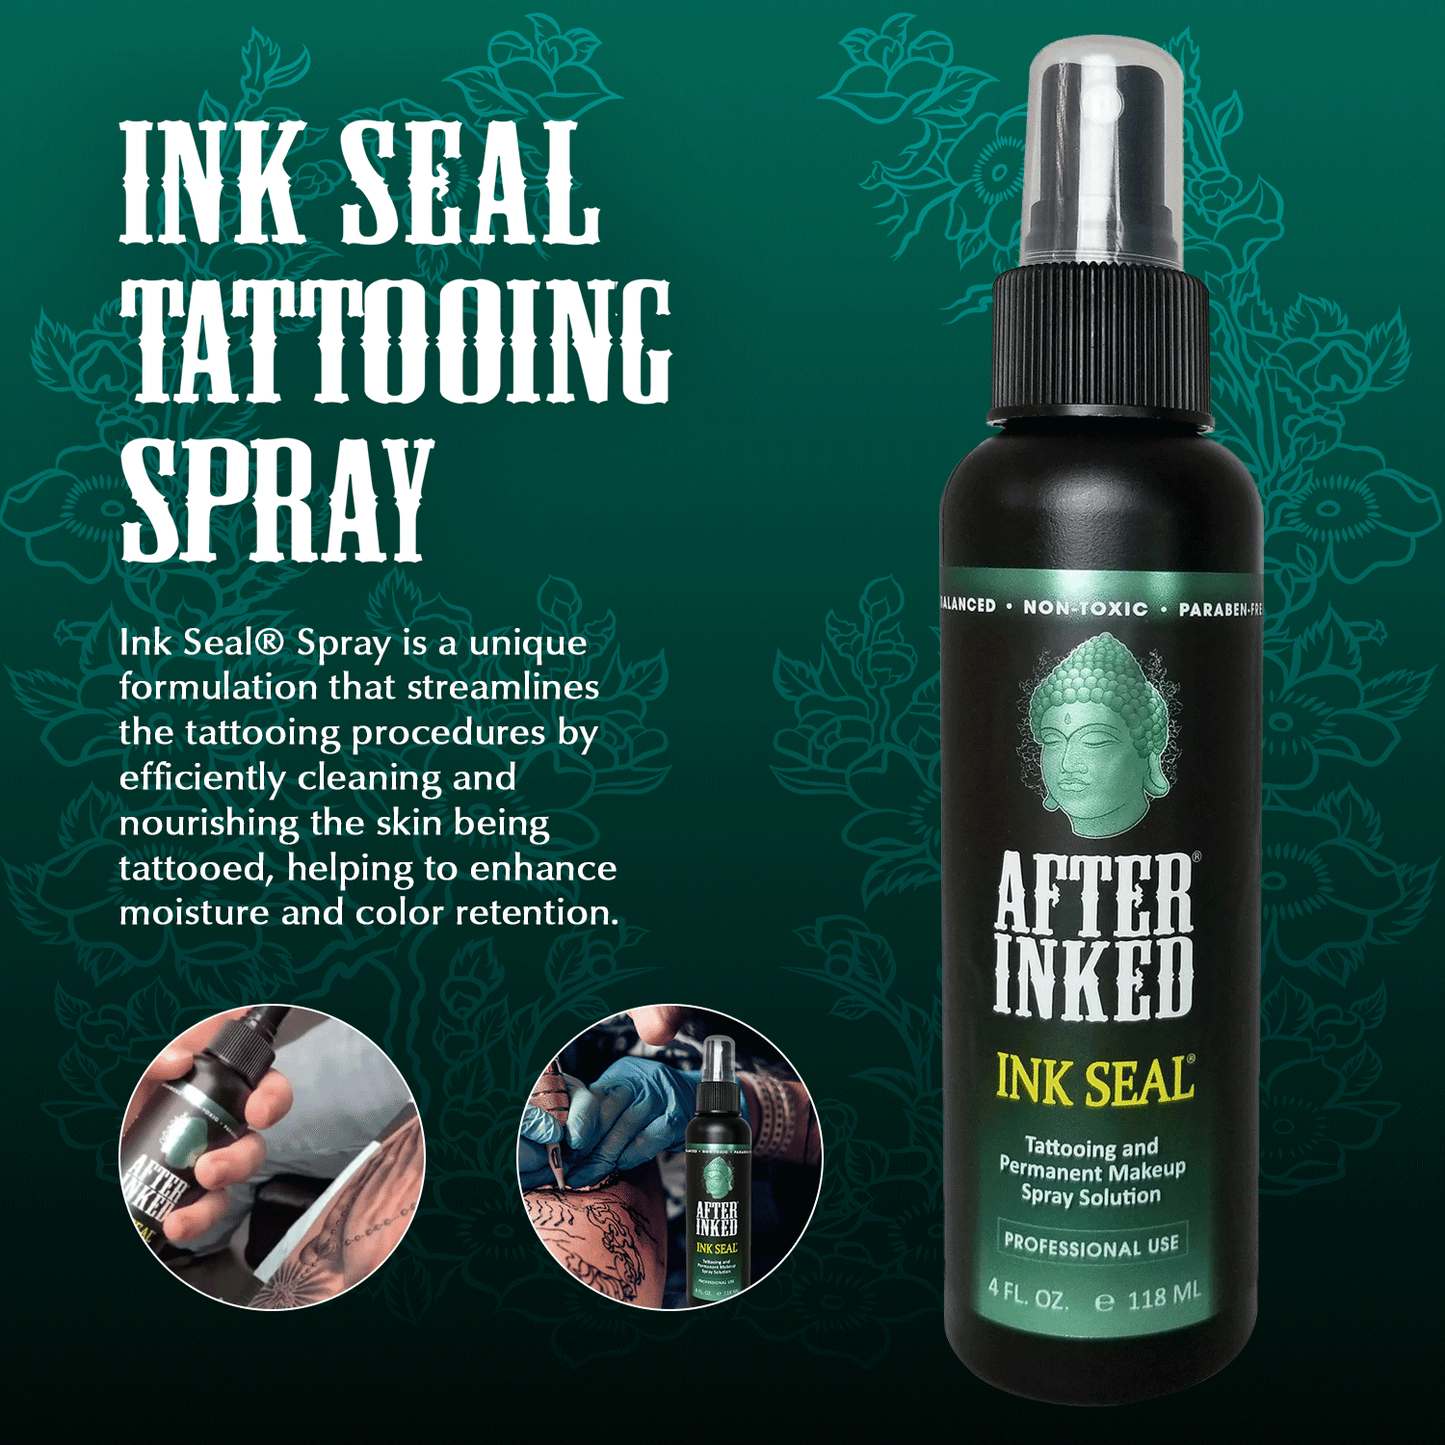 Ink Seal tattooing spray is a unique formulation that streamlines the tattooing procedures and efficiently cleaning and nourishing the skin being tattooed, helping to enhance moisture and color retention.